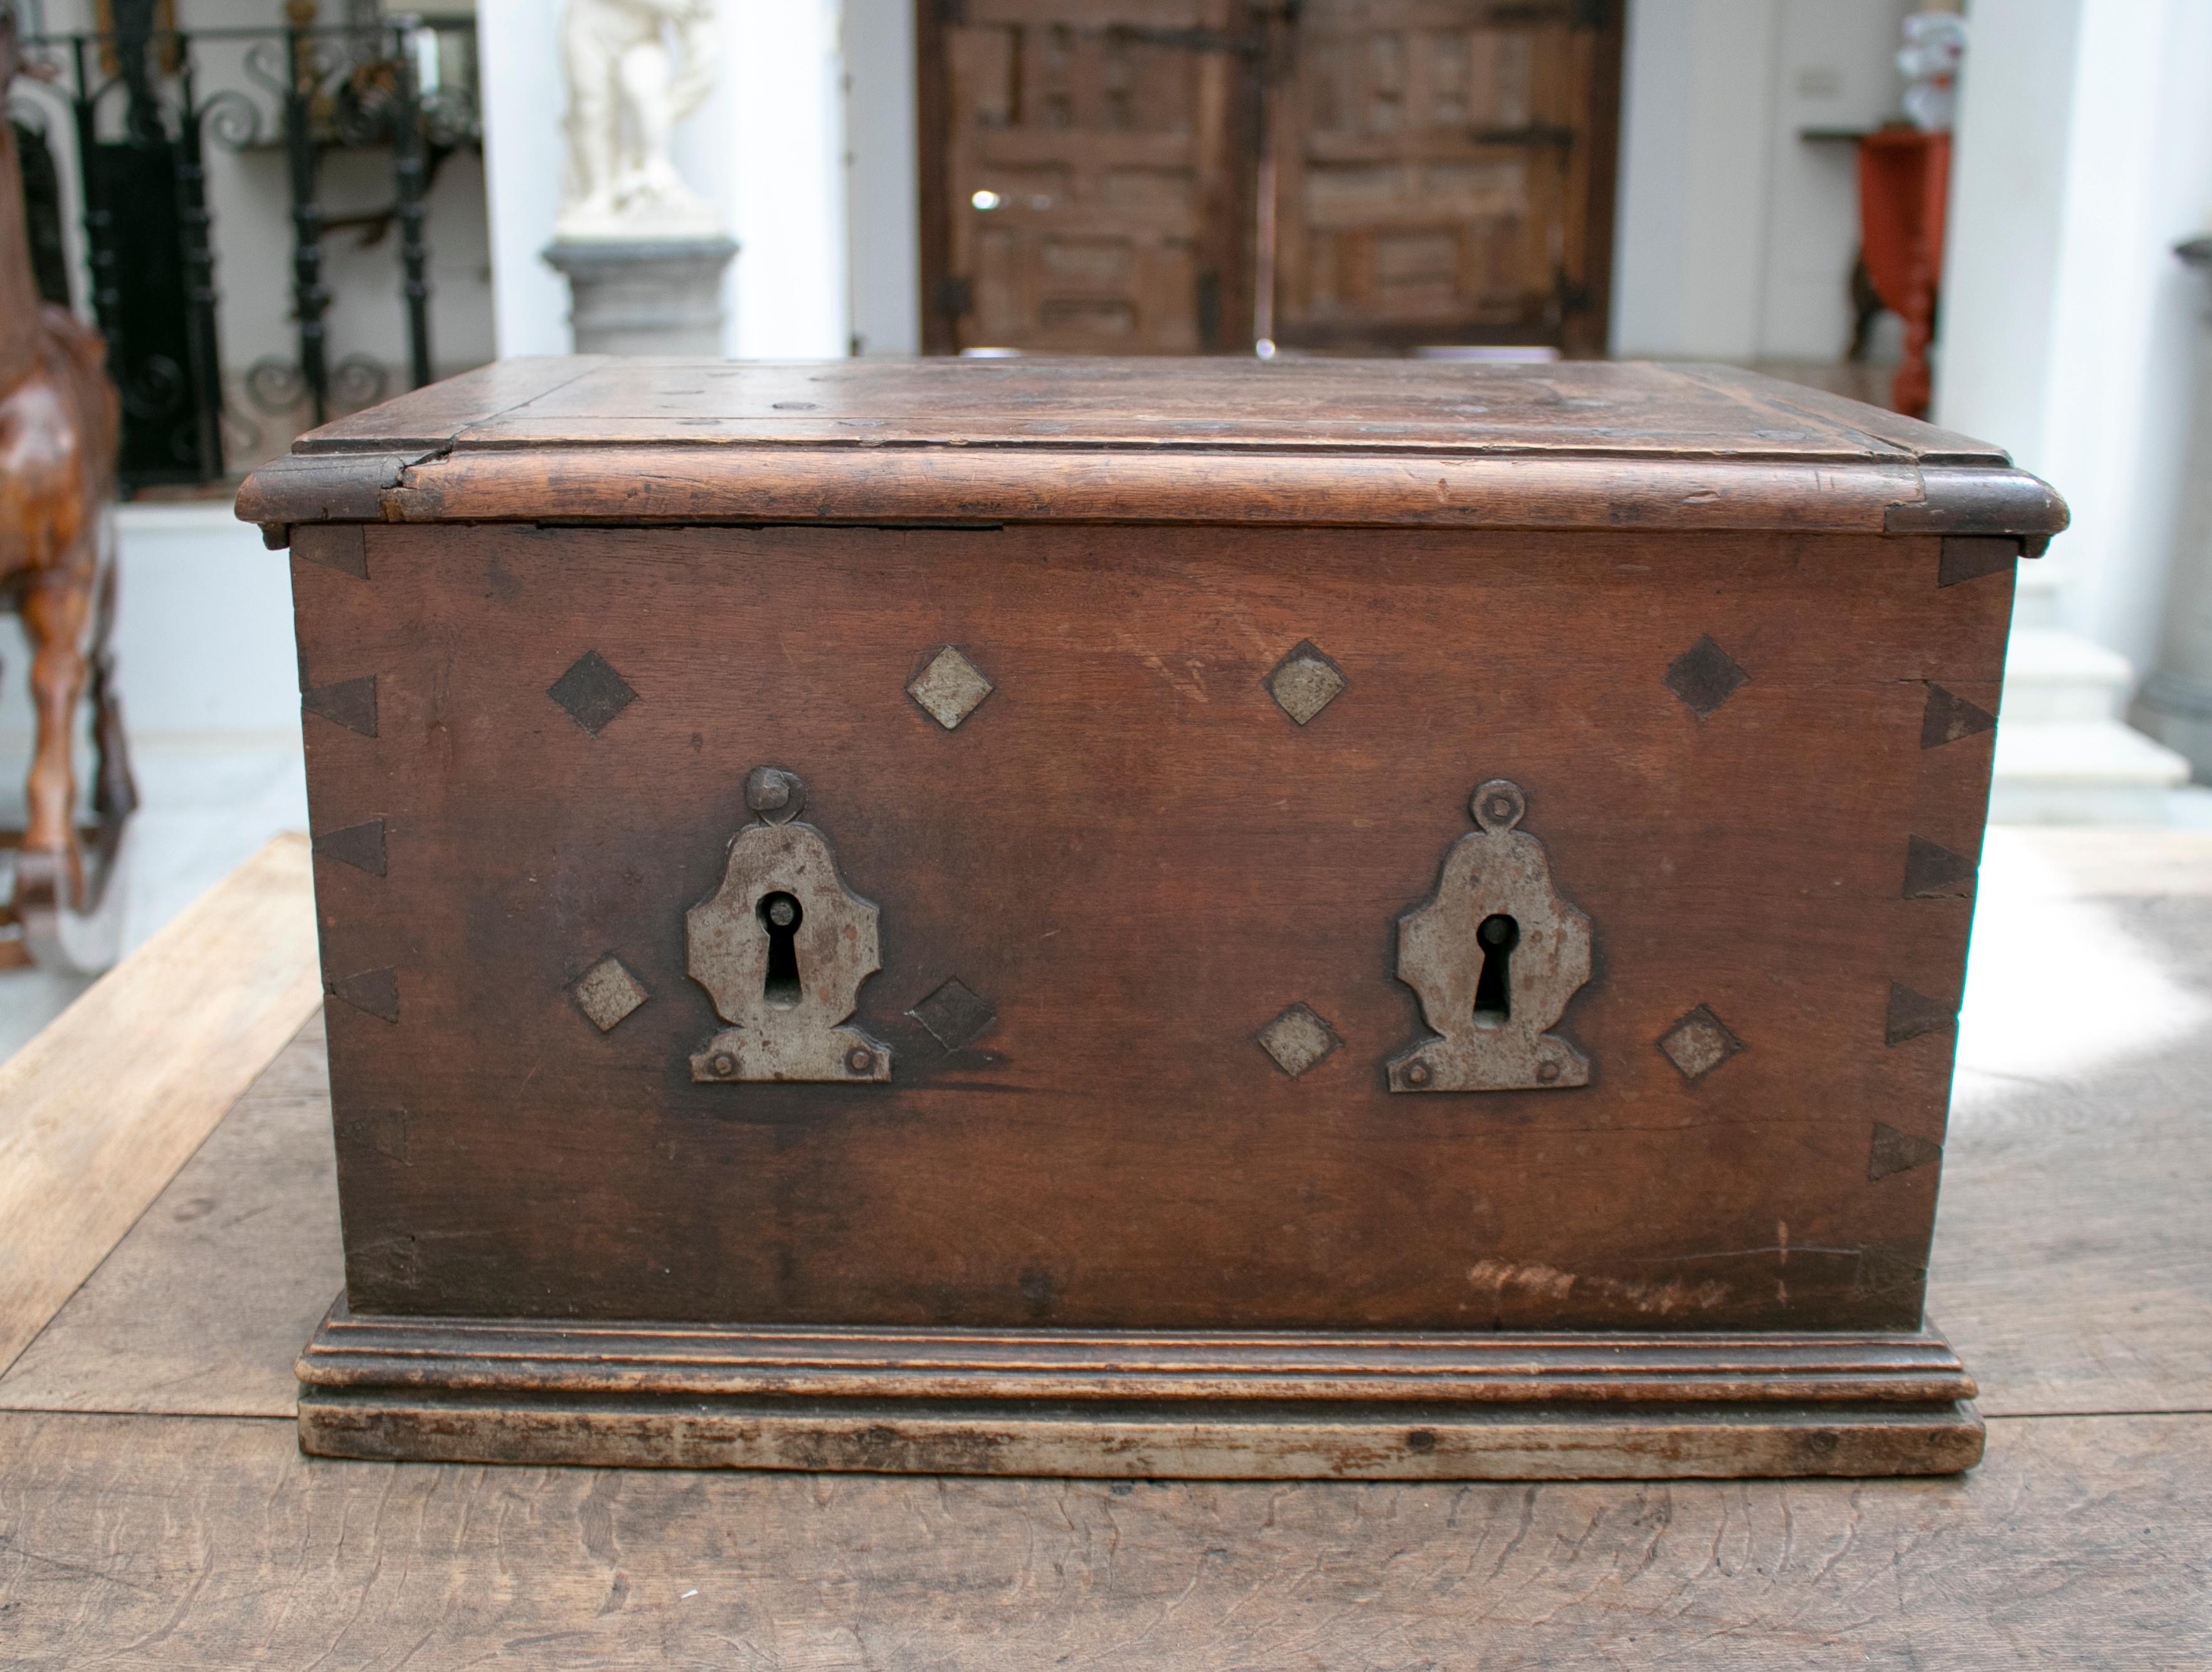 18th century Spanish walnut strongbox safe with two locks for added security and original wrought Iron fittings.

 